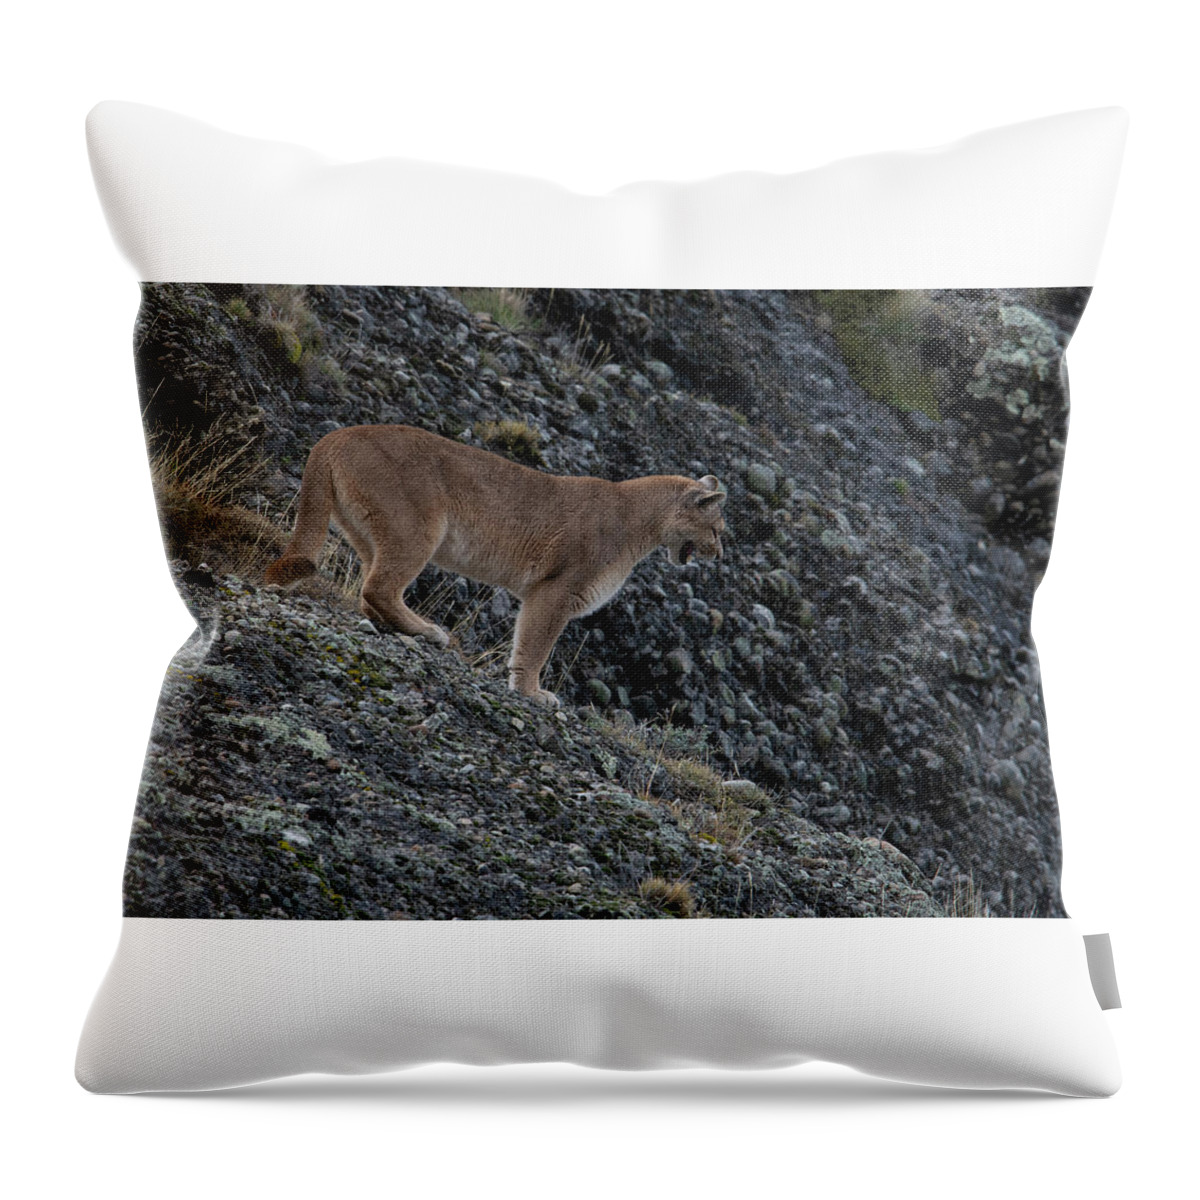 Female Throw Pillow featuring the photograph Female Puma by Patrick Nowotny